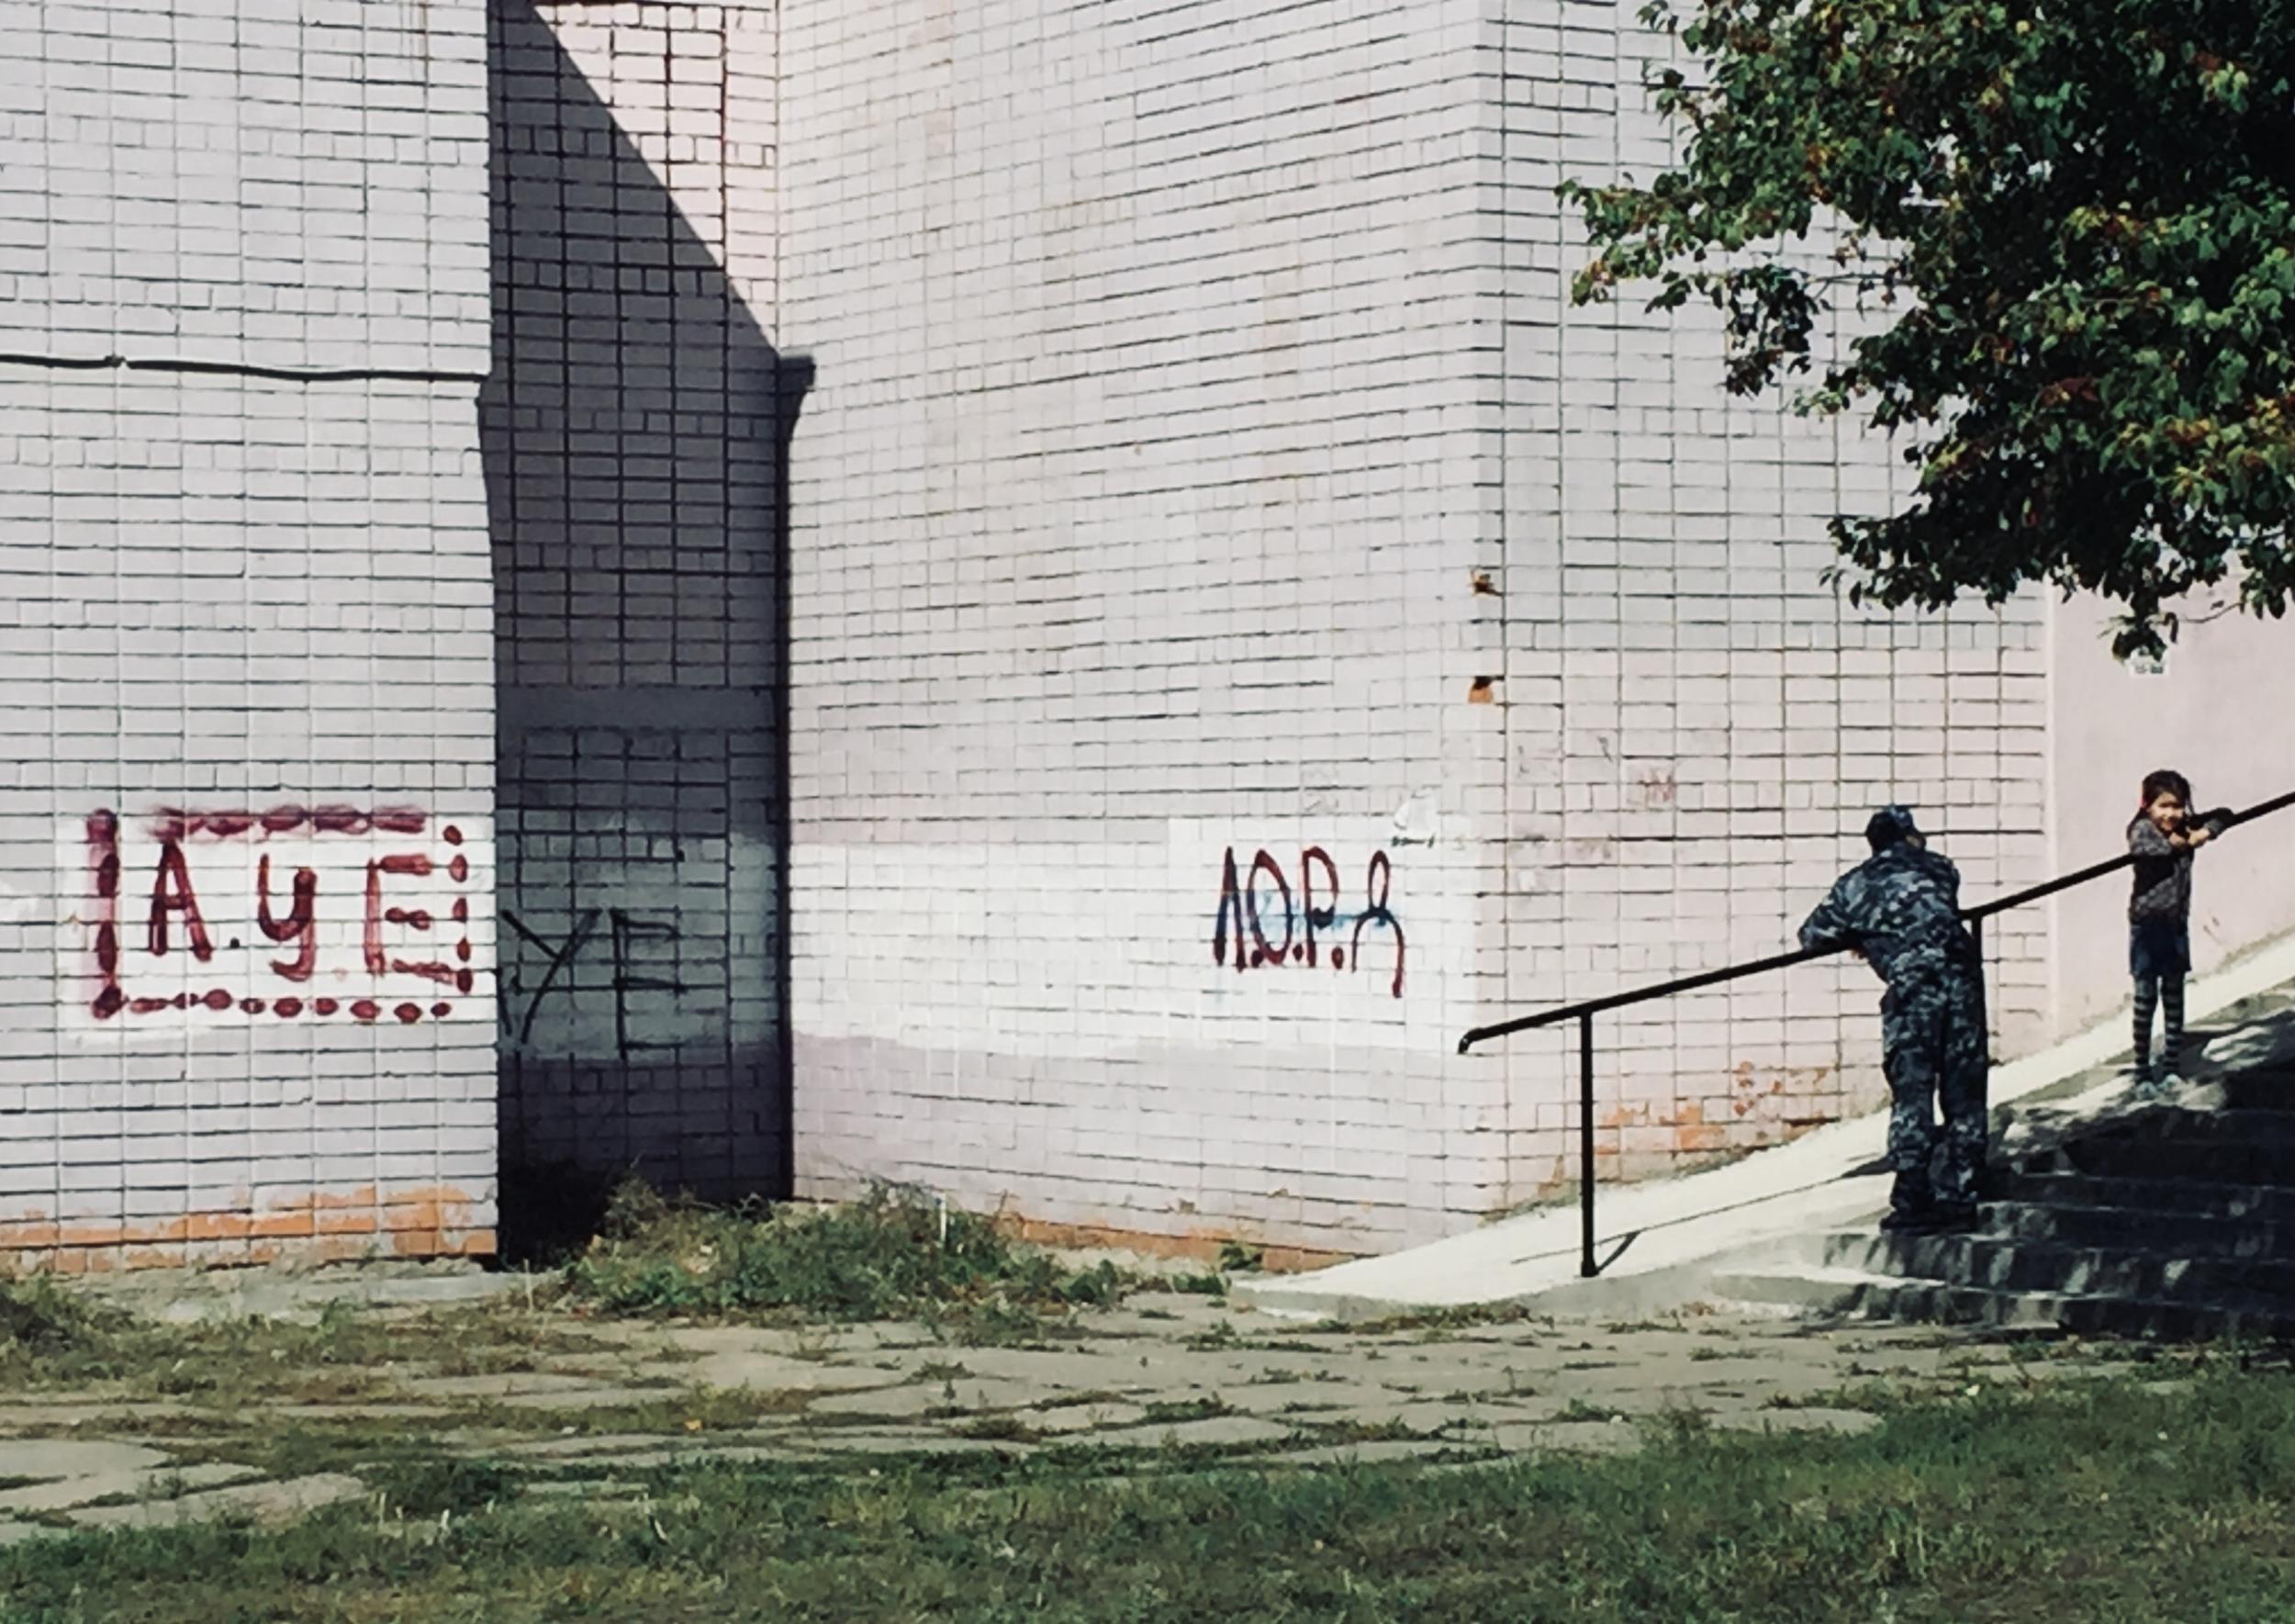 In outskirts of Irkutsk, graffiti praising “AUE“ – a gang-type movement pushing youngsters into the underground. Serious crime has fallen significantly since the 1990s, which were especially dark times in Irkutsk and surrounding towns. But locals complain some of the criminals have since moved into ruling party politics.